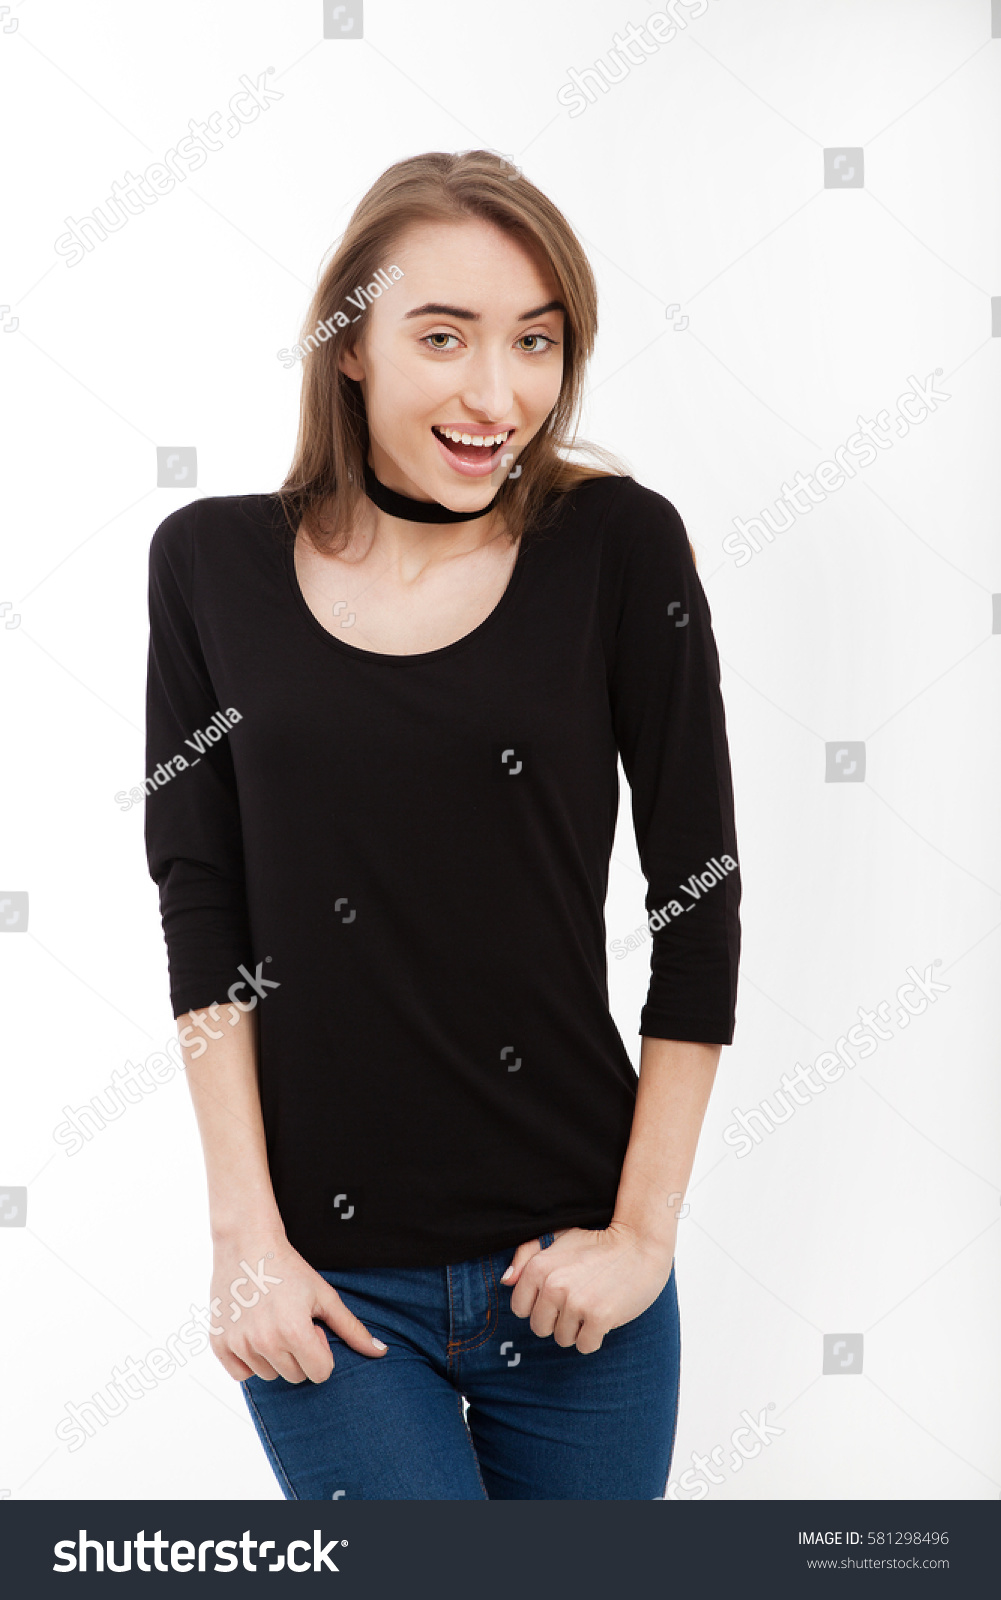 Download Young Woman Black Tshirt On White Stock Photo 581298496 ...